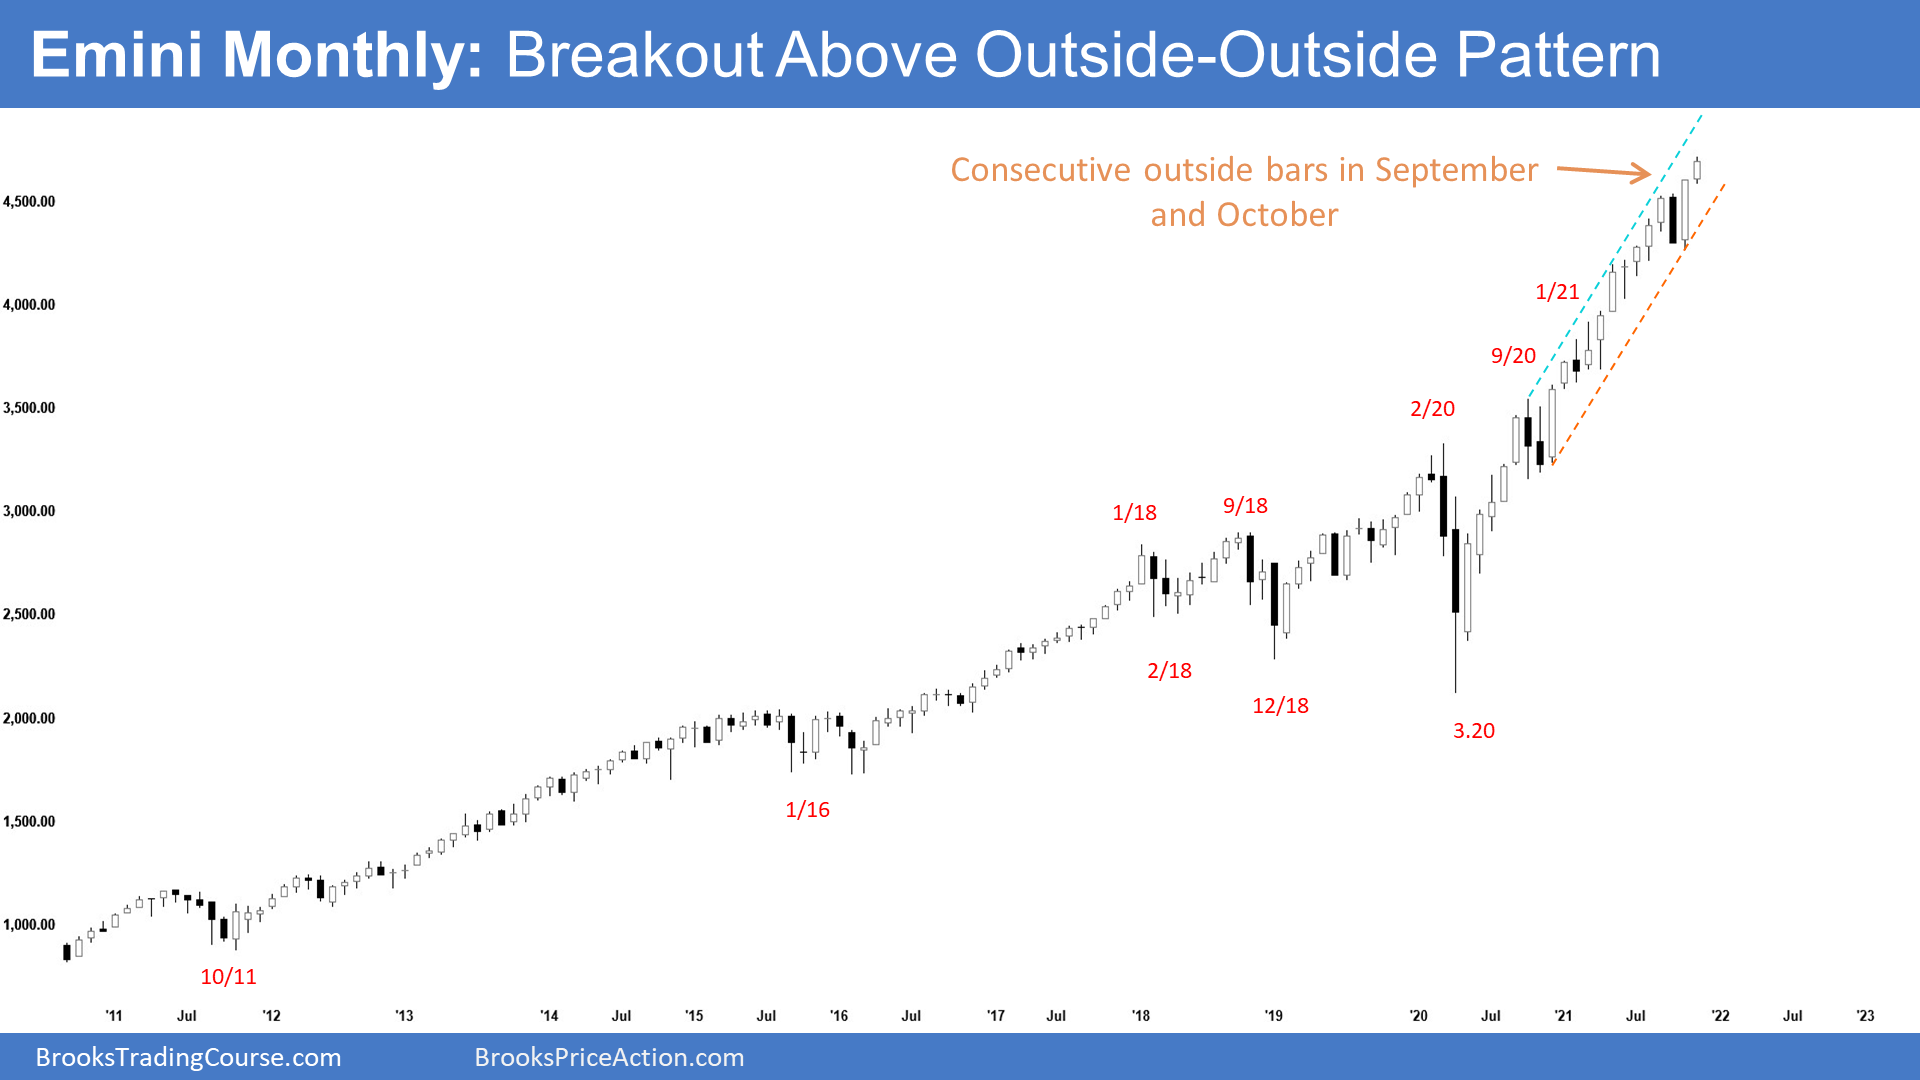 SP500 Emini Monthly Chart Breakout above Outside-Outside Pattern